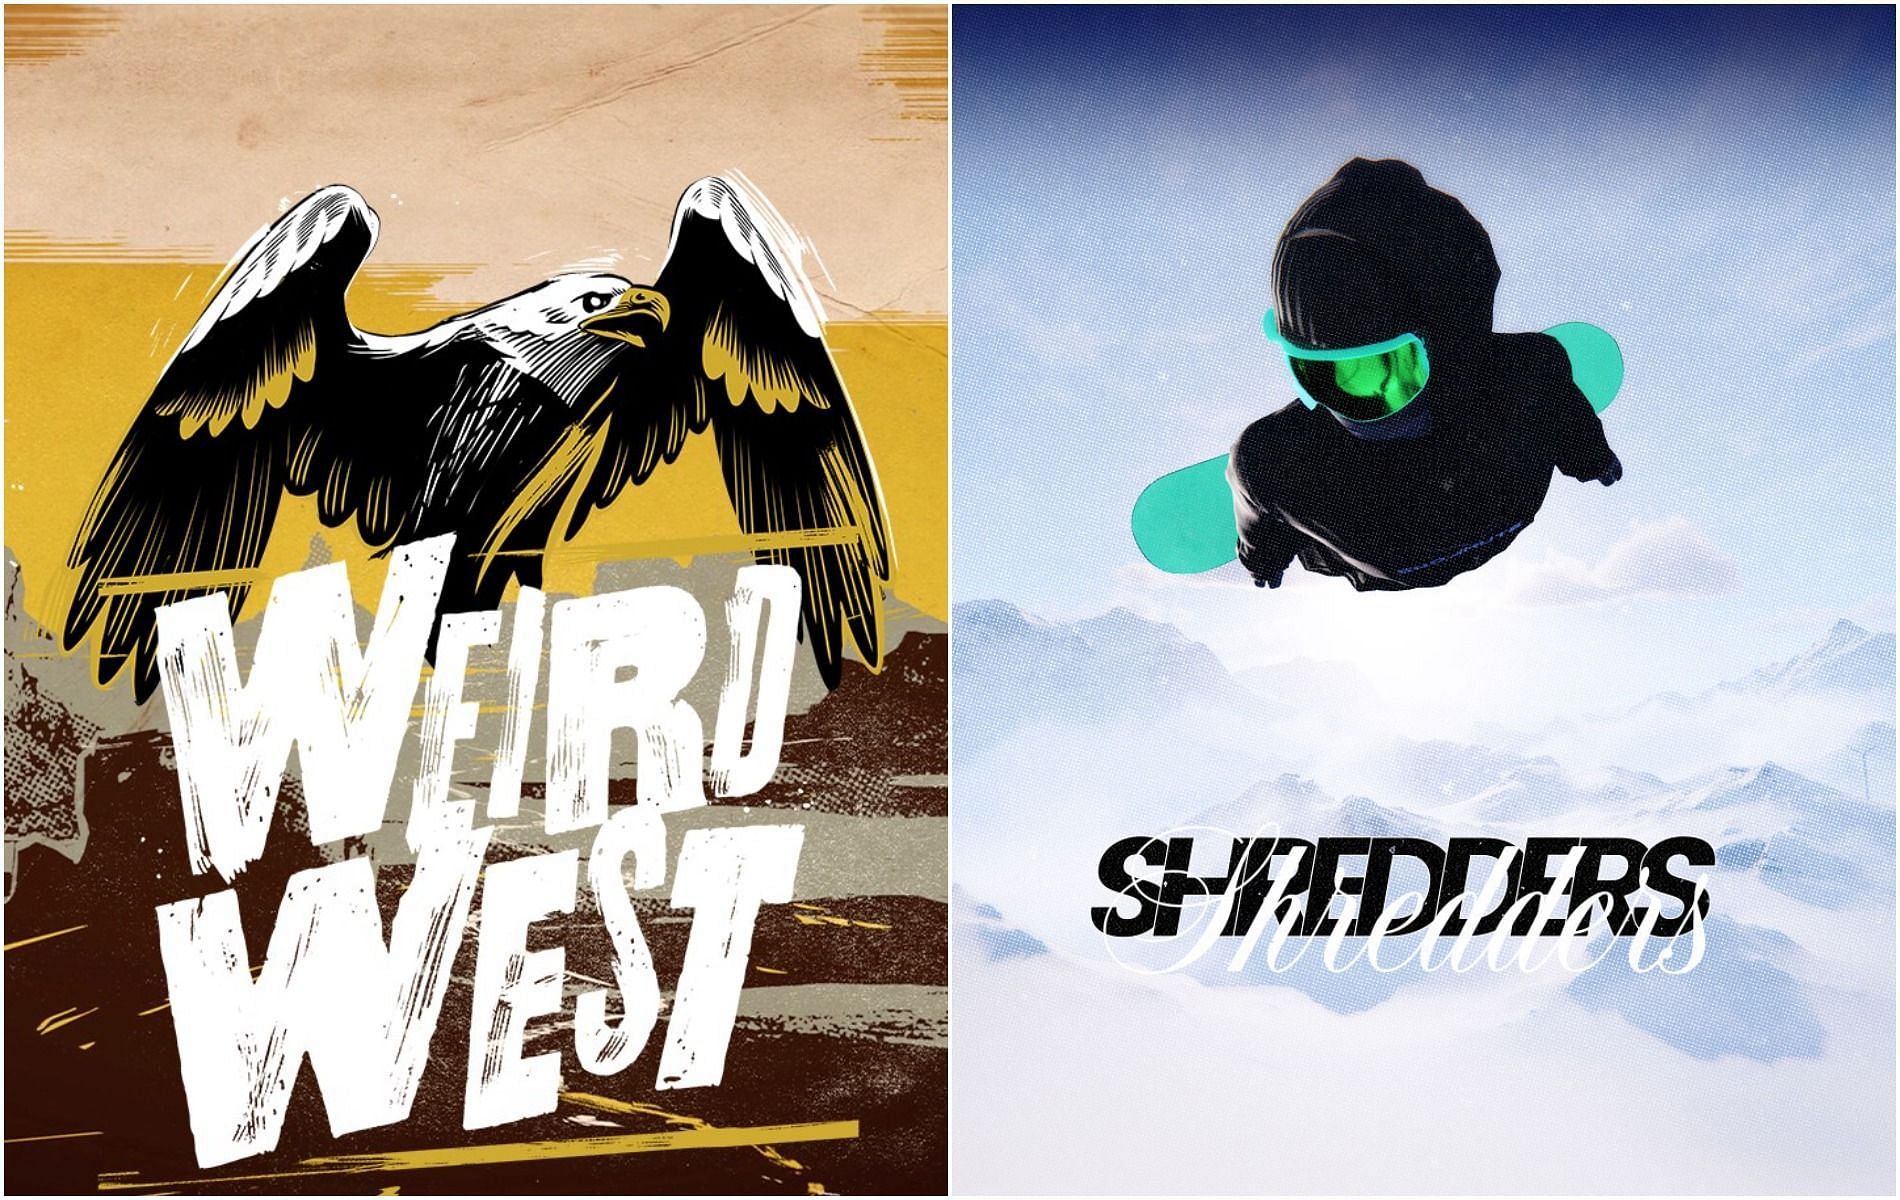 Xbox Game Pass adds 8 new games in March 2022, including Weird West and Shredders on Day 1 (Image by Devolver Digital and Foam Punch)